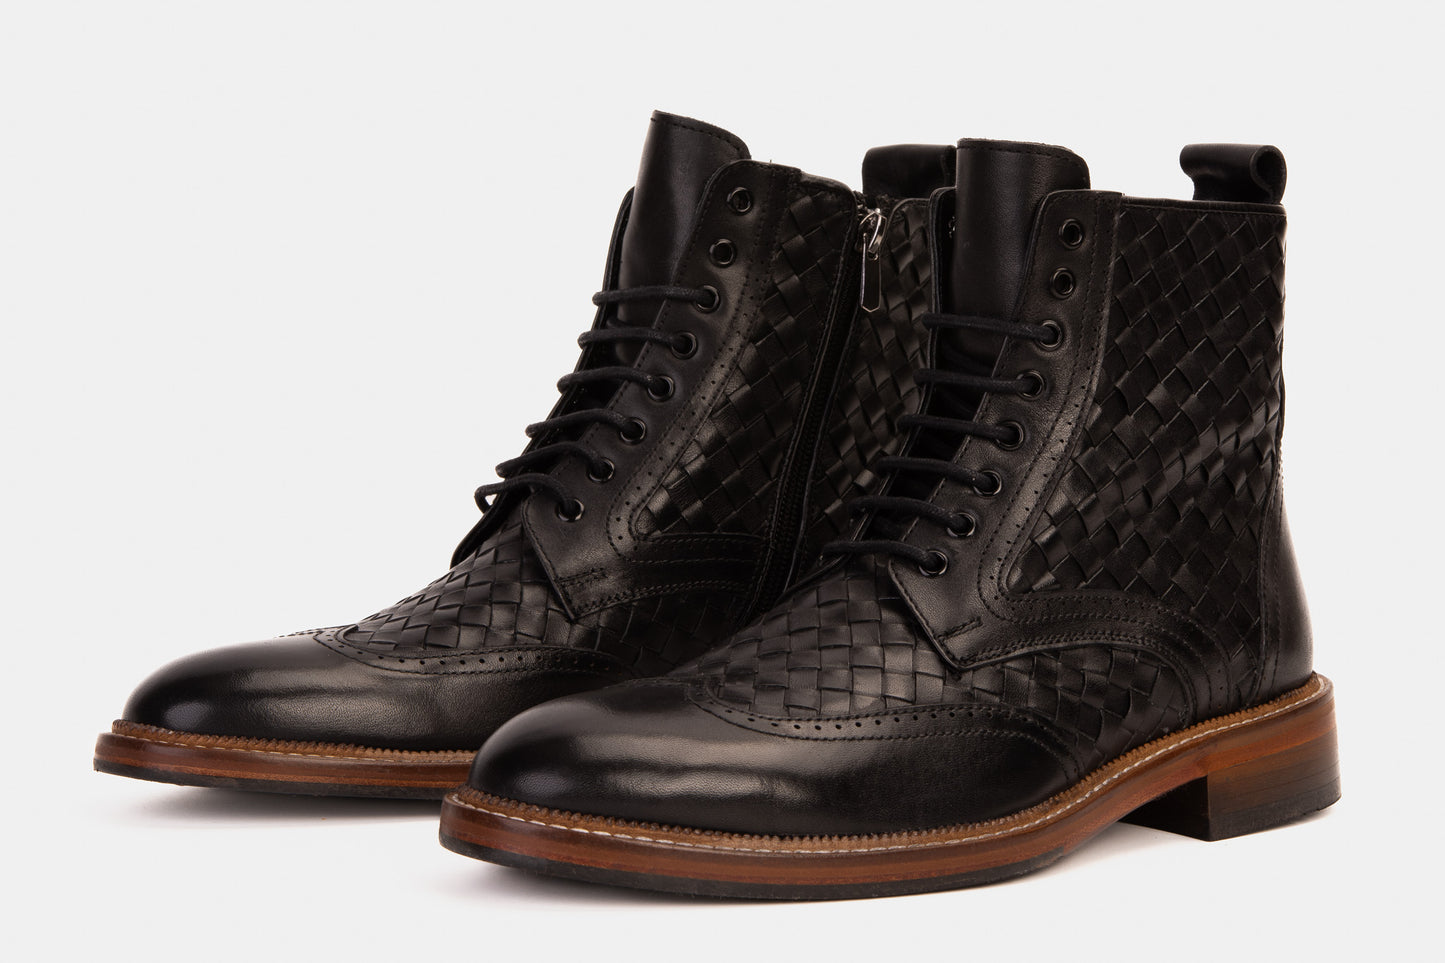 The Loddon Black Leather Wingtip Brogue Handwoven Lace-Up Men Boot with a Zipper